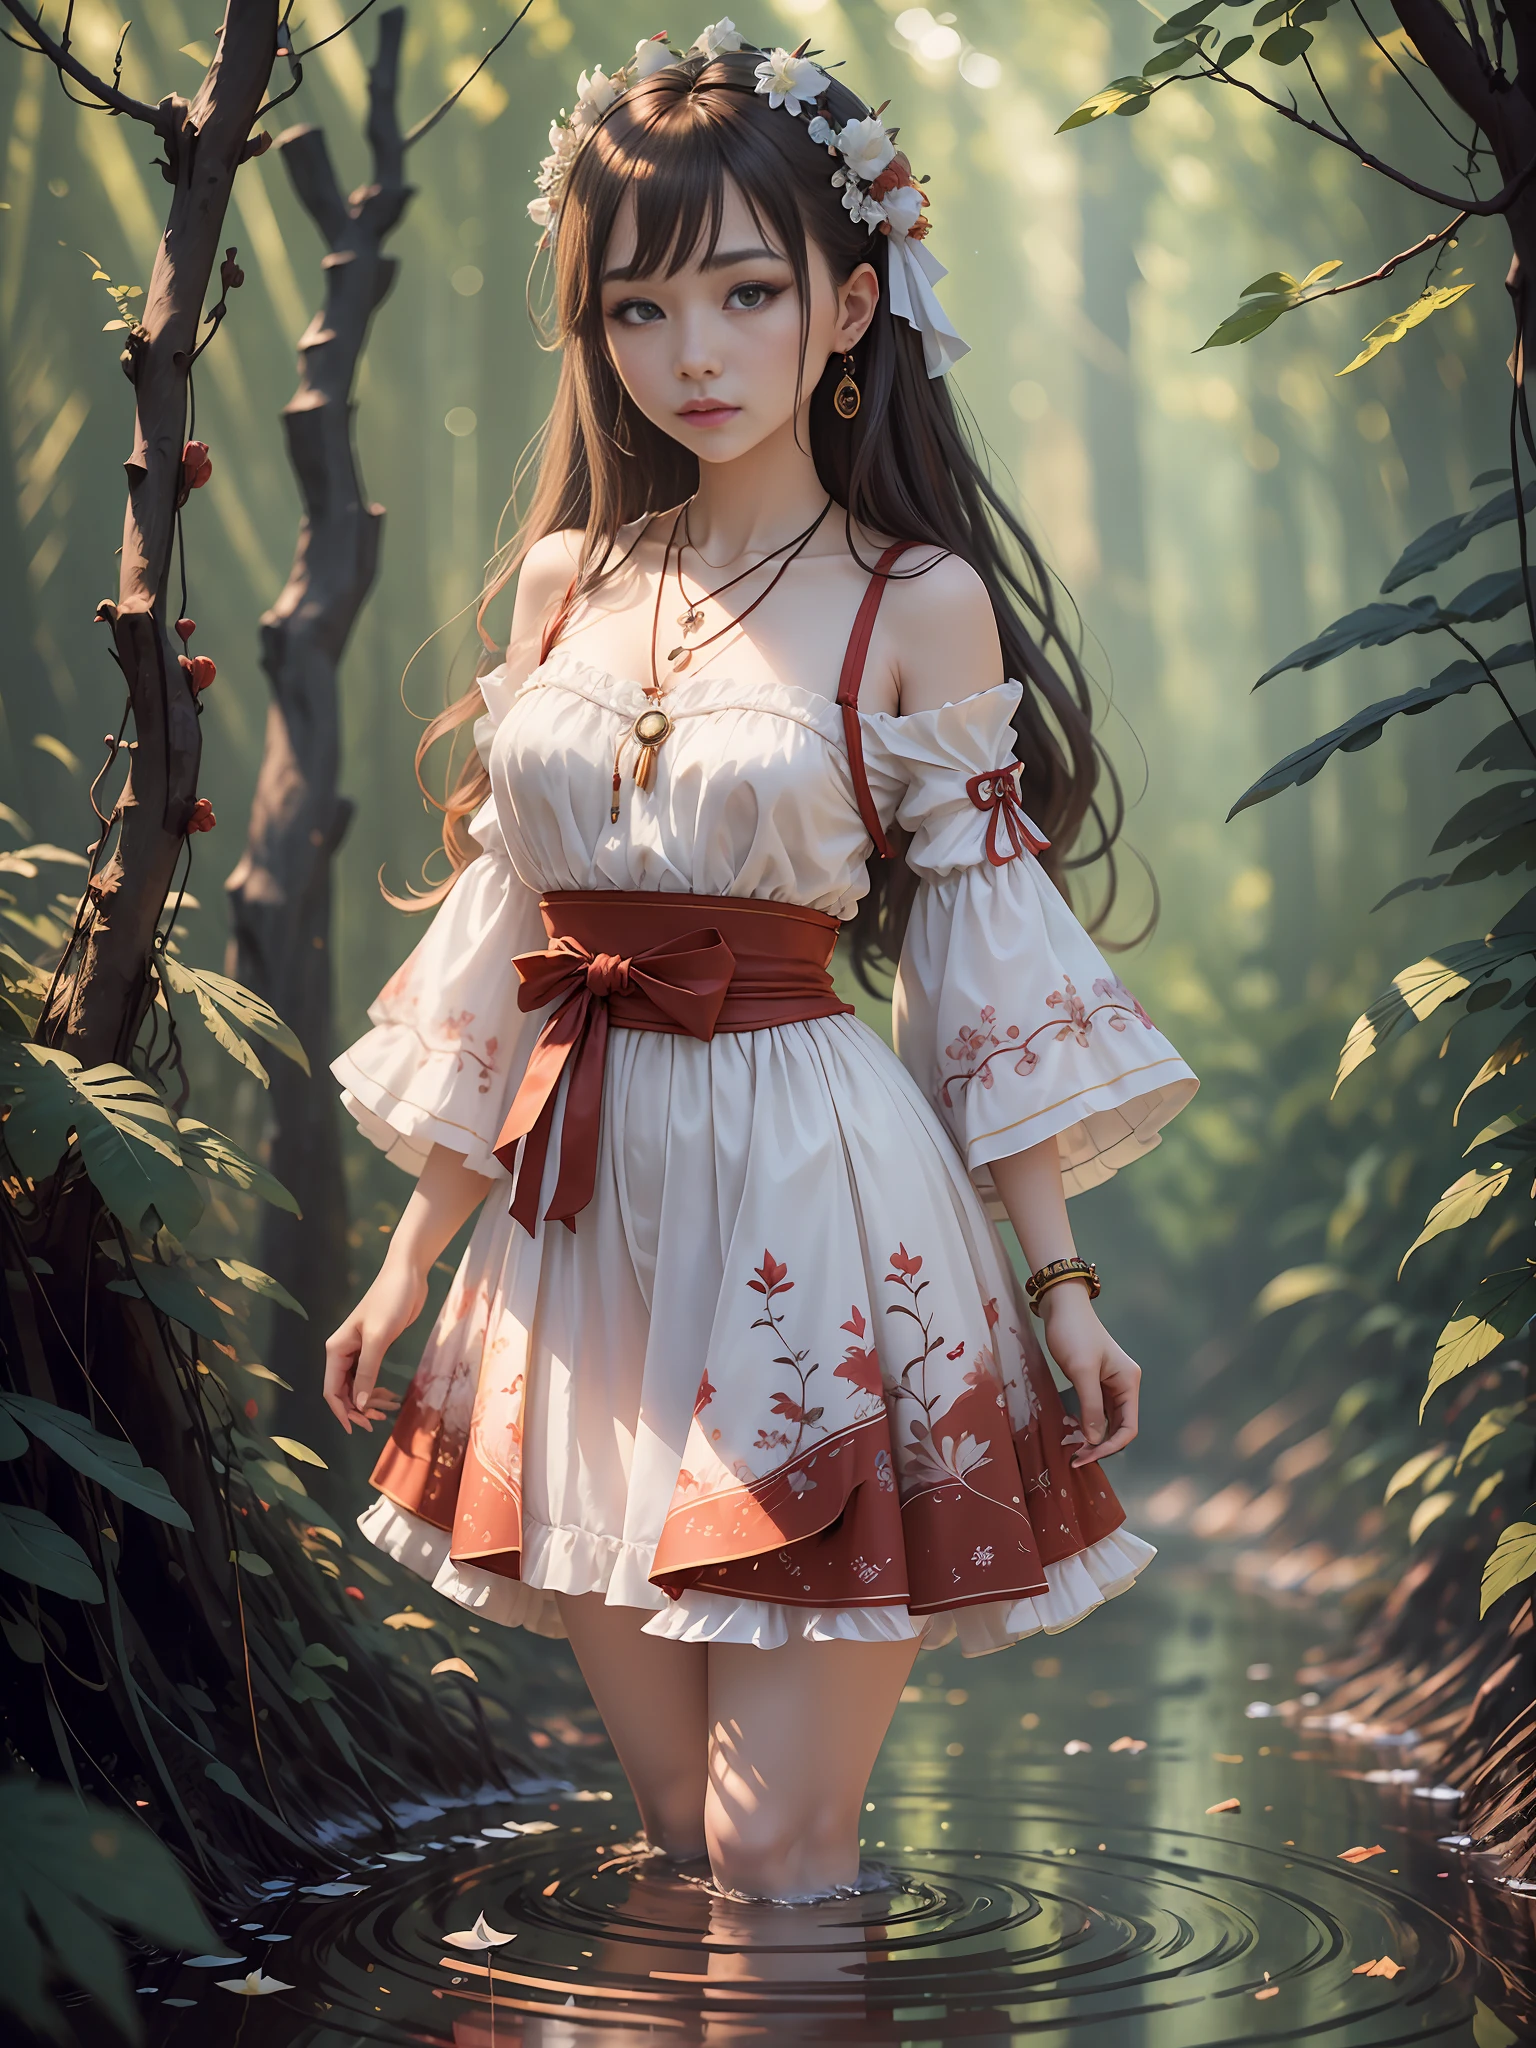 (best quality, masterpiece, high resolution, glow, flood, lens glare, wide angle), sunlight, full body, 1 [Chinese|Russian|Japanese|Korean] girl, ((Mei red:1.1) clothes), necklace, jewelry, long hair, earrings, super delicate face, beautiful face, full face blush, perfect eyes (very long eyelashes: 1.4), glowing pupils, (white stockings: 0.9), realism, (high detail skin: 1.2), 8k ultra hd, DSLR, high quality, volumetric lighting, frankness, high resolution, 4K, 8K, background bokeh, dream forest, feather drop effect, morning, foreground